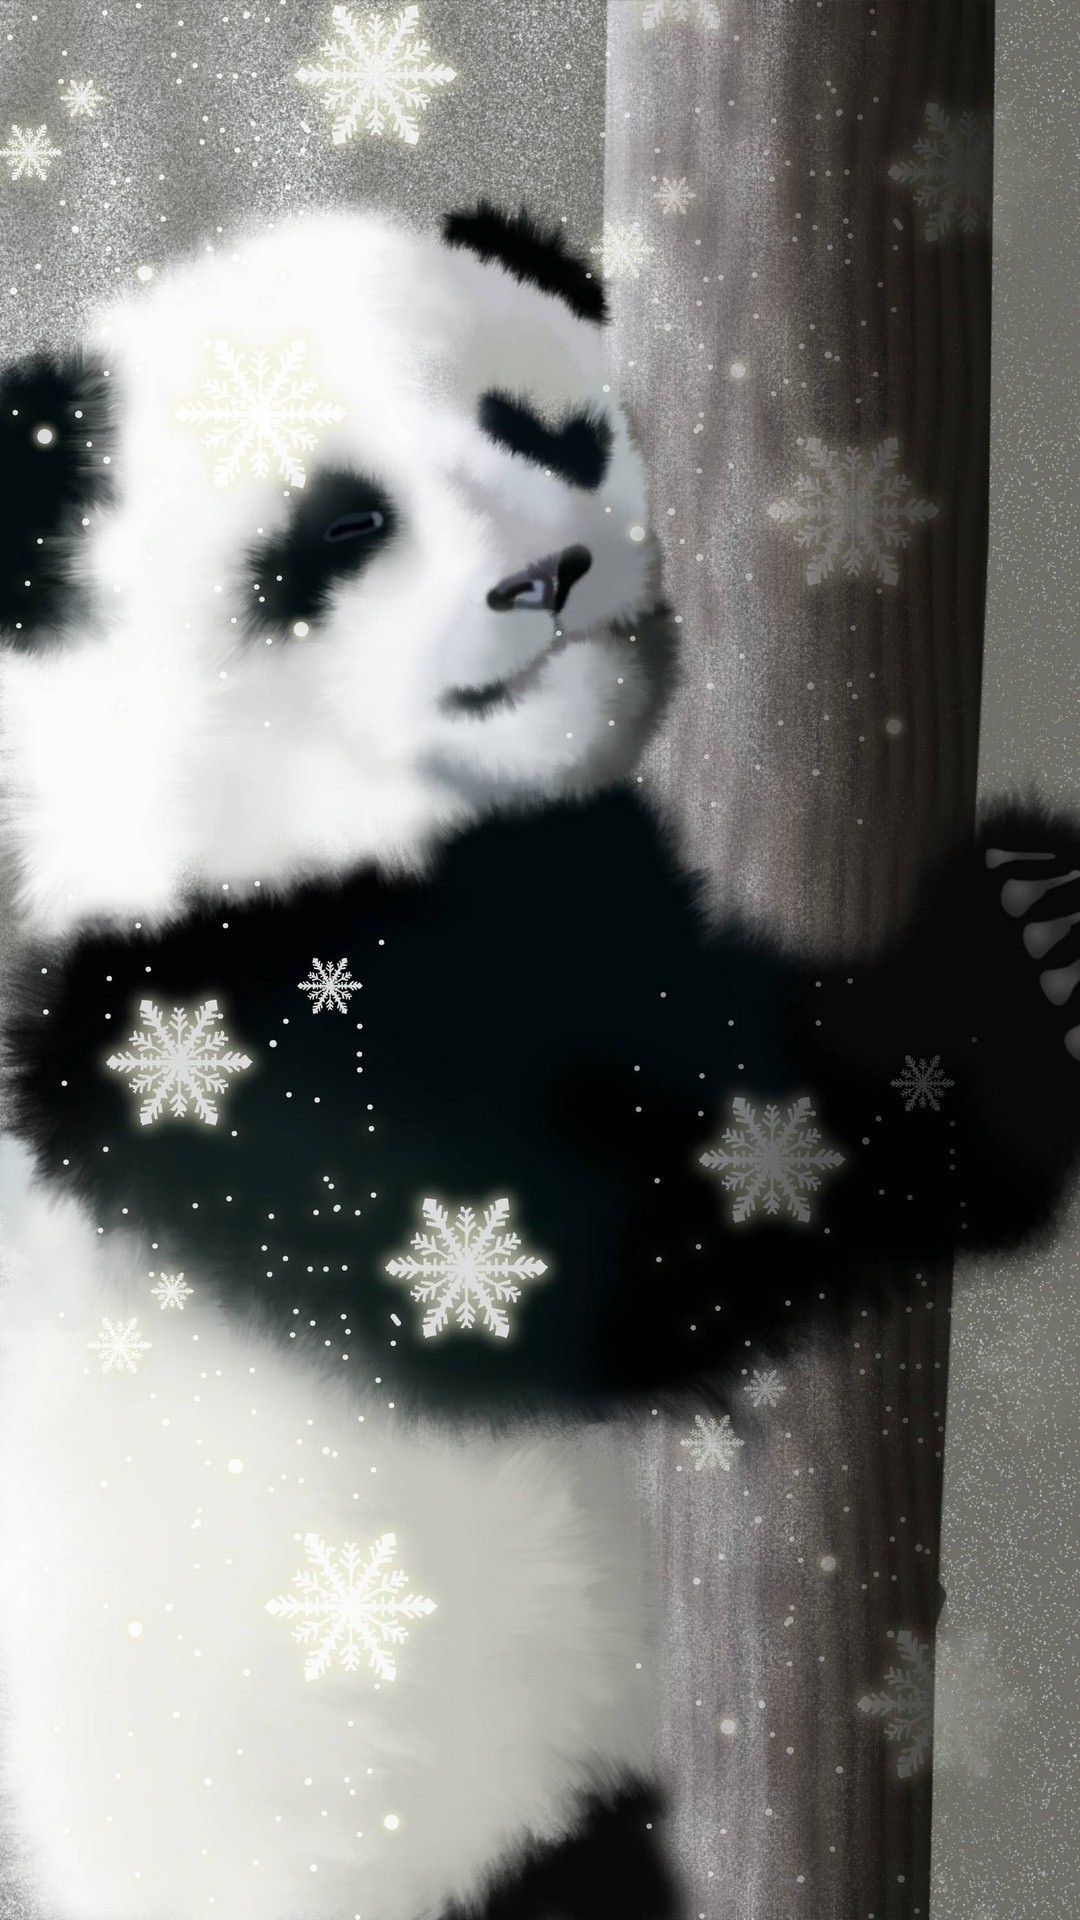 equal-finch221: Baby panda in pajamas Po black background Angry dark